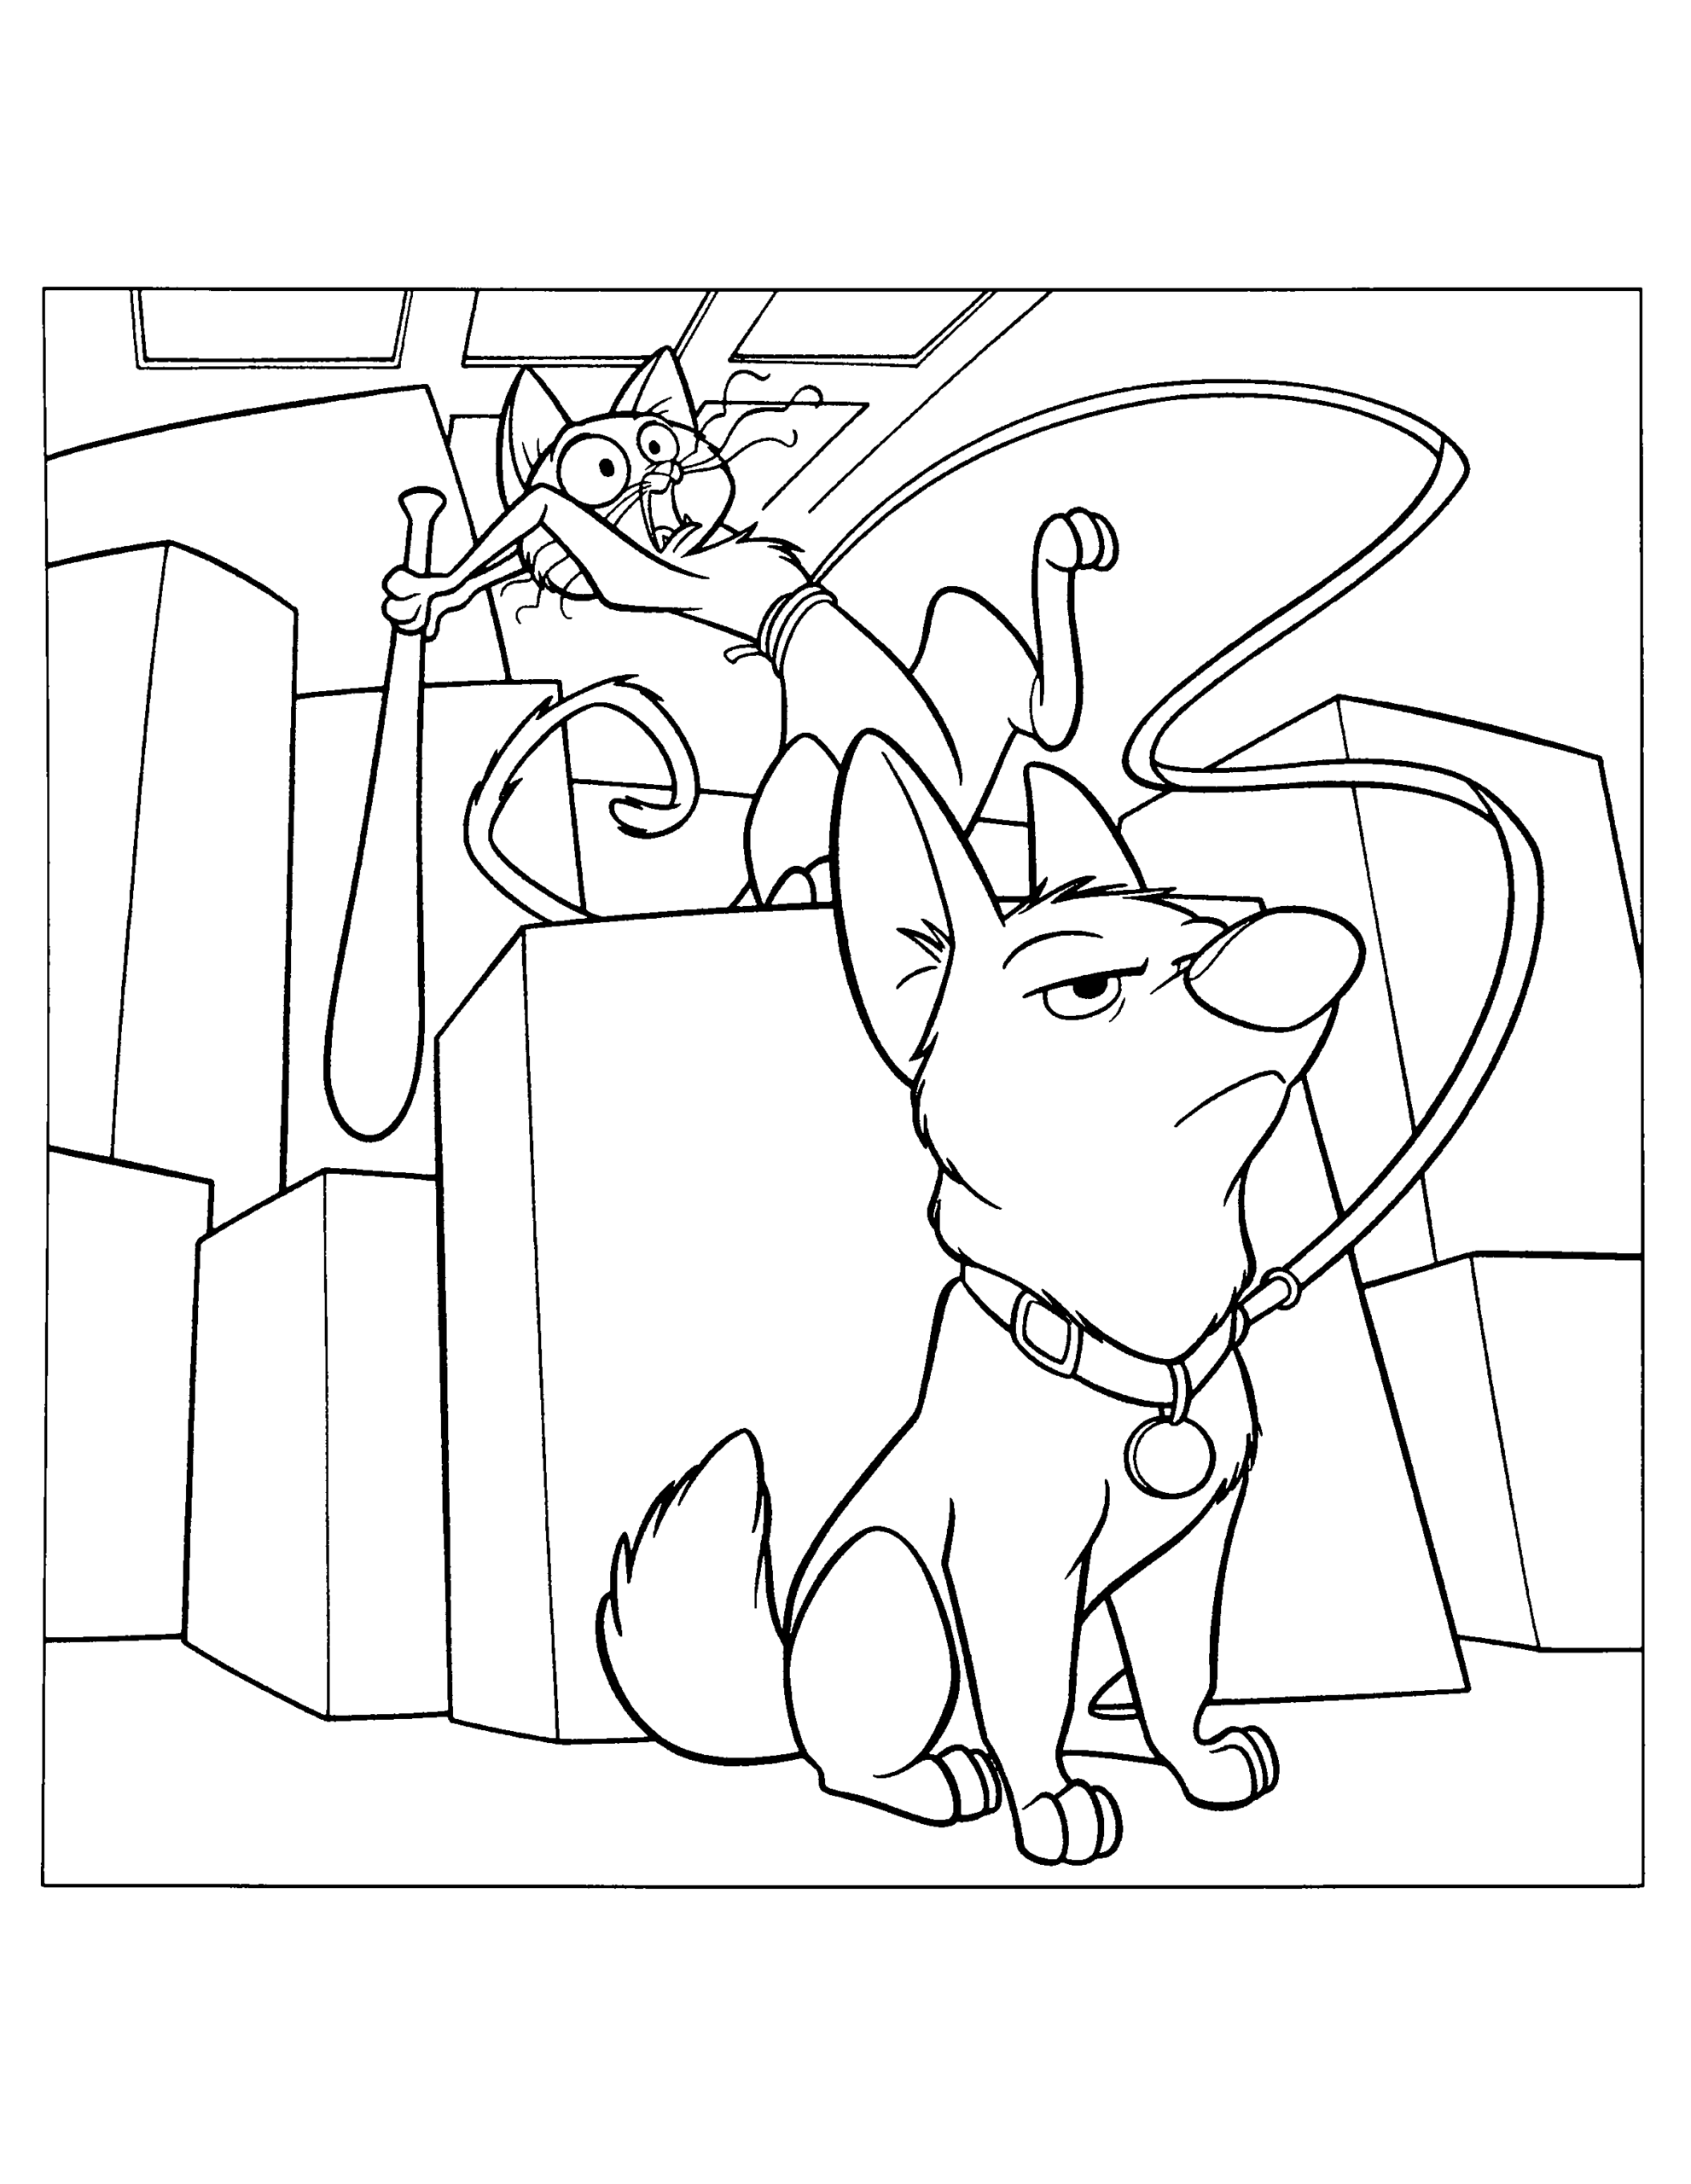 Bolt Coloring Pages TV Film bolt r8Qy3 Printable 2020 01206 Coloring4free